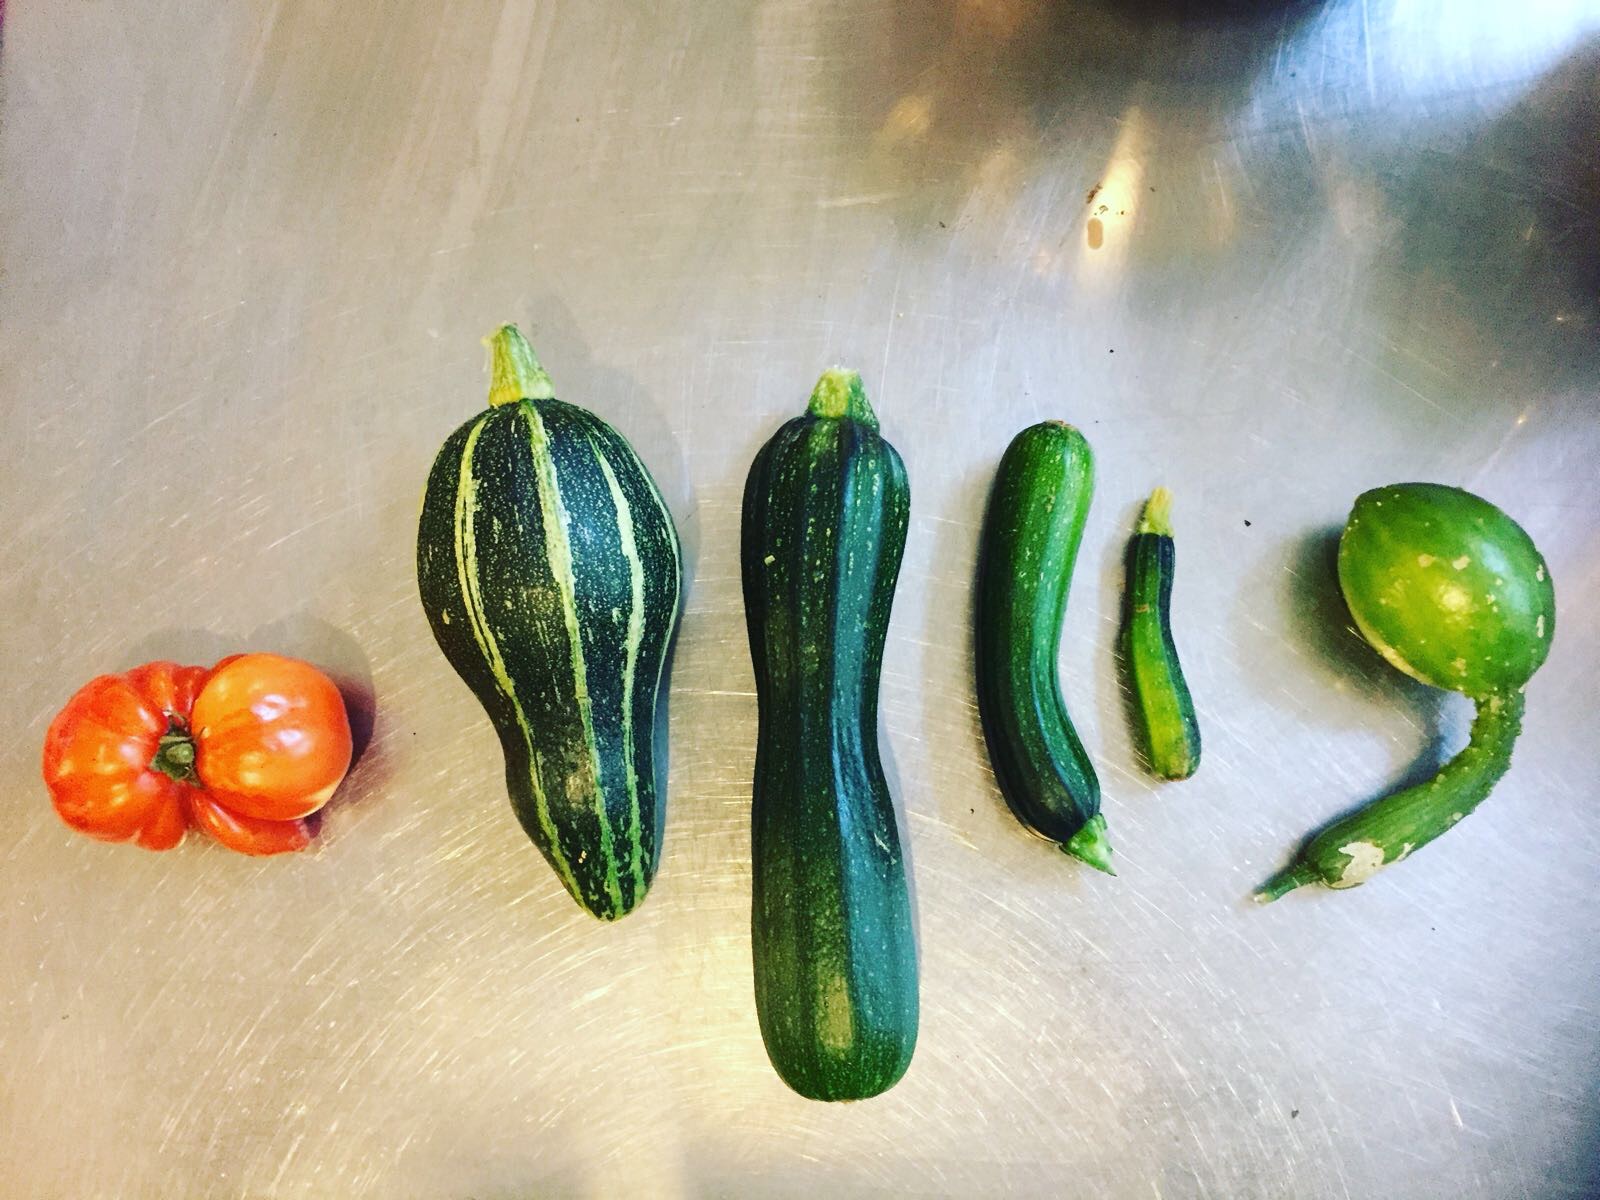 Beautifully shaped Vegetables